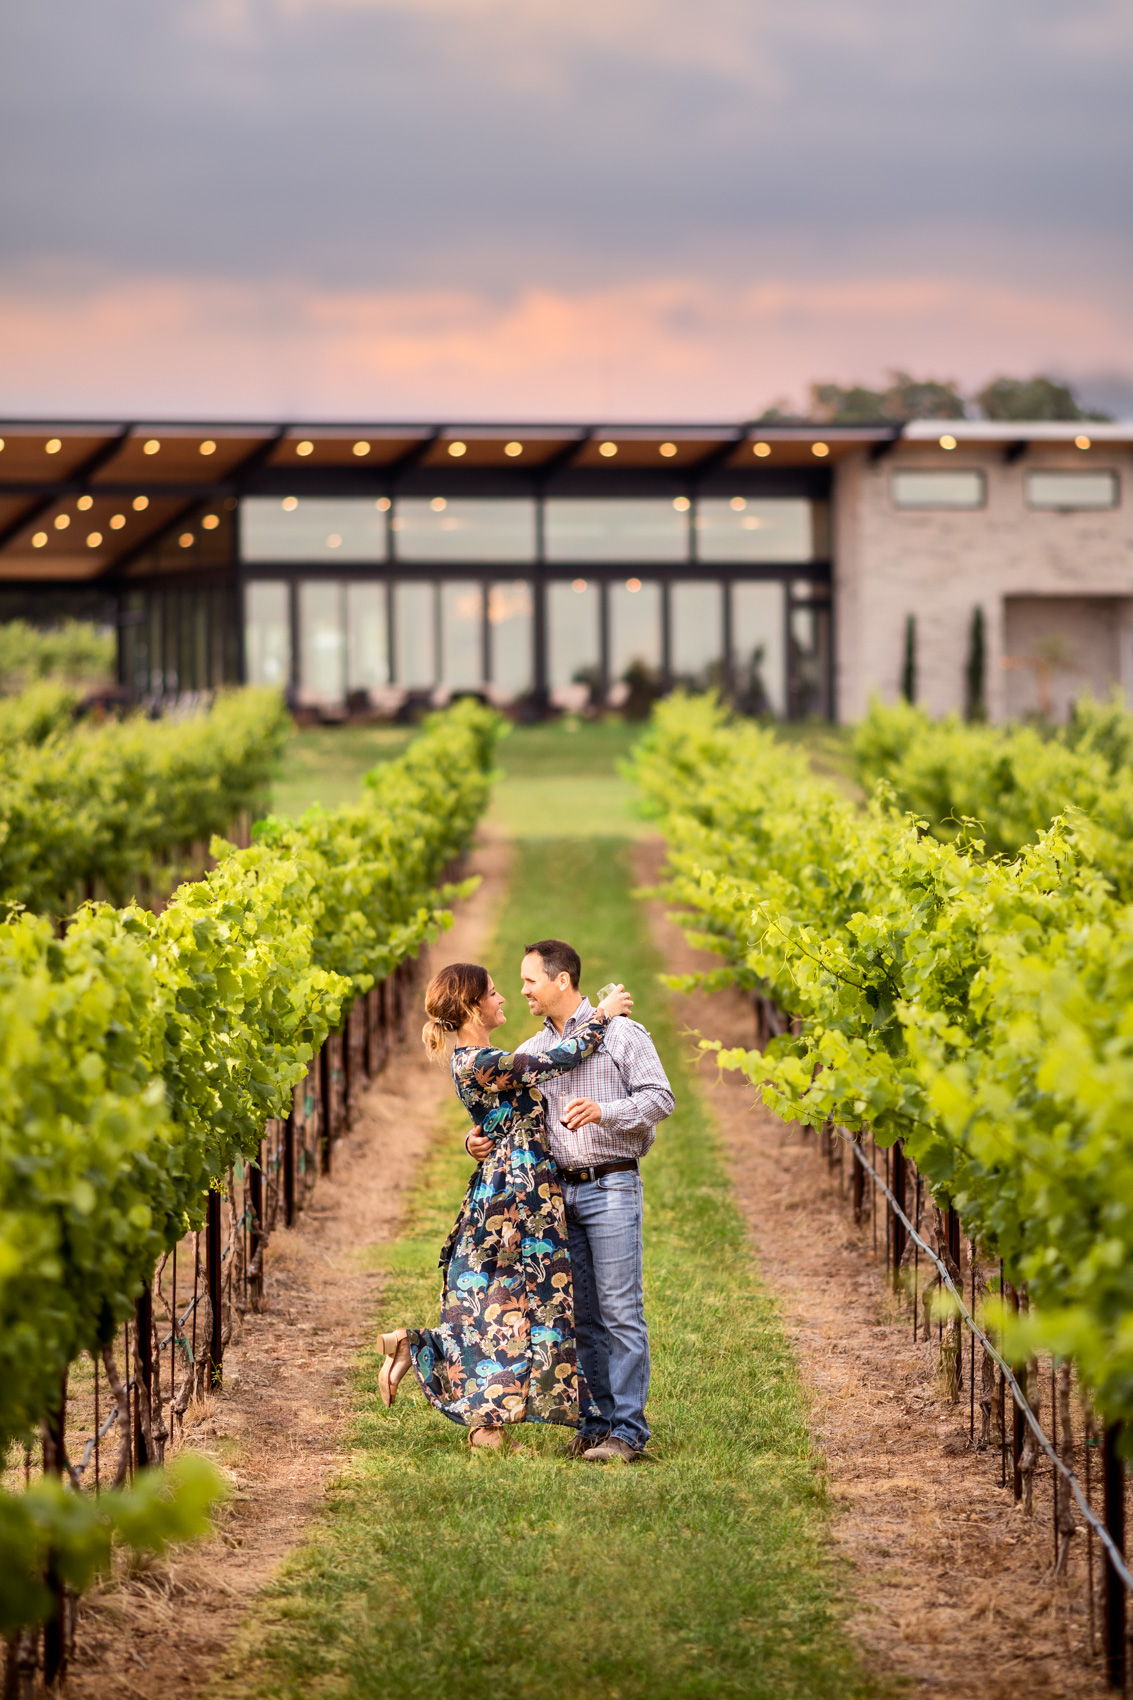 couple embrace in vineyard with winery in background